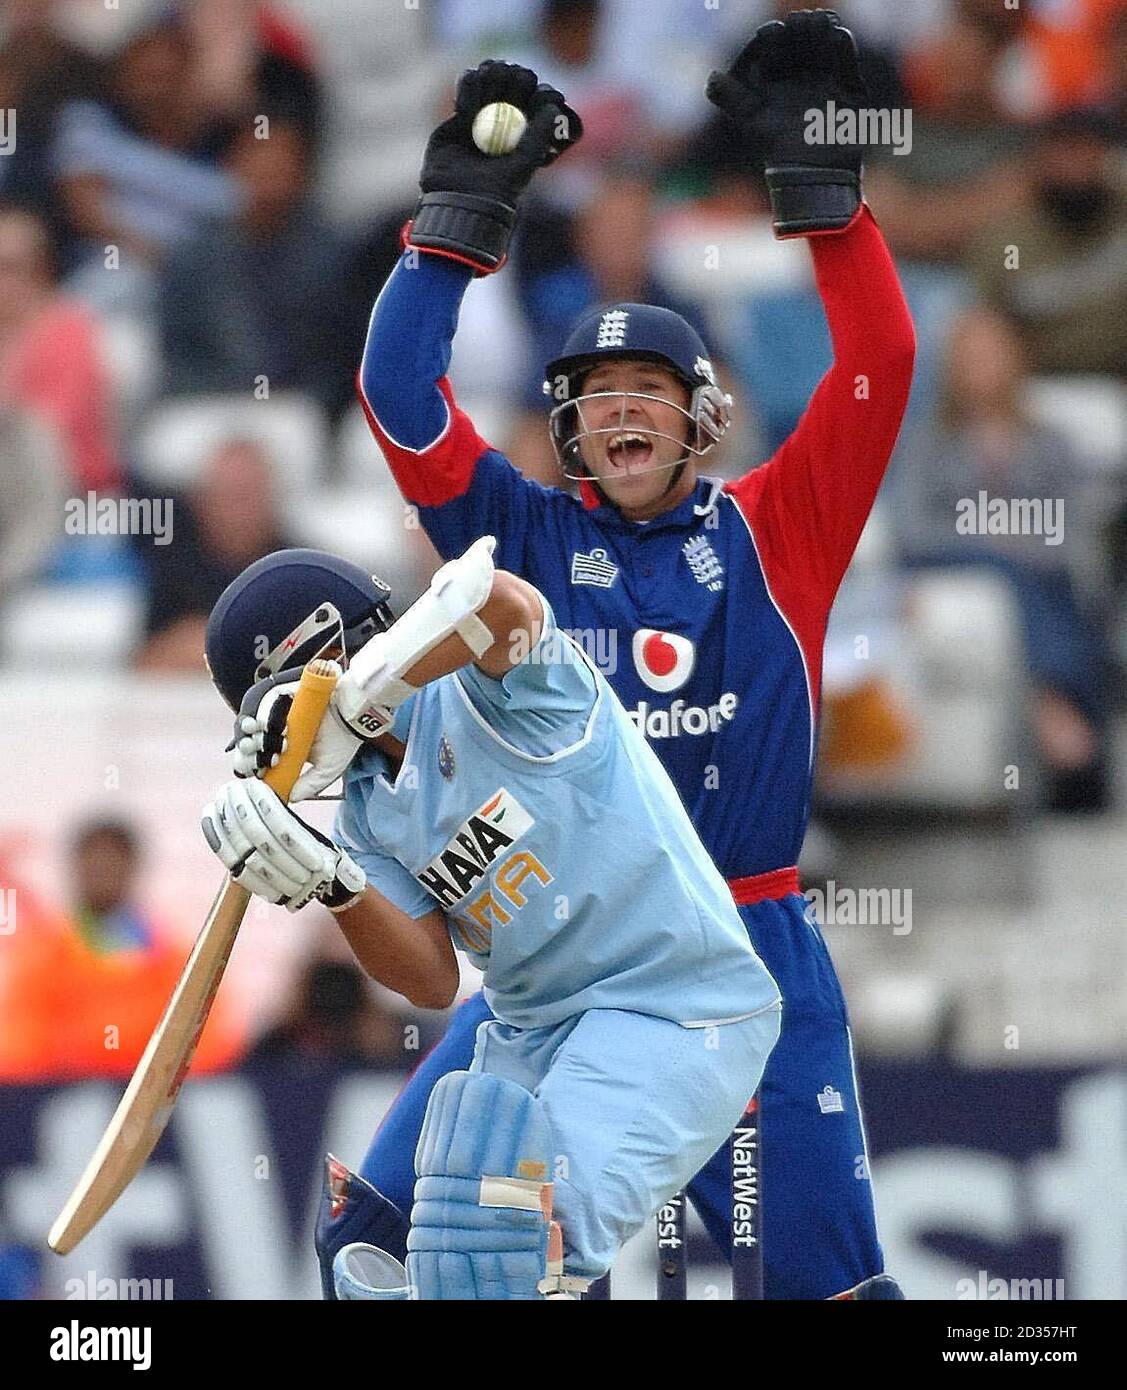 Contrasting expressions as England wicket keeper Matthew Prior shows delight and Indian batsman Sachin Tendulkar his frustration after being caught off the bowling of Jon Lewis during the Fifth NatWest One Day International at Headingley, Leeds. Stock Photo